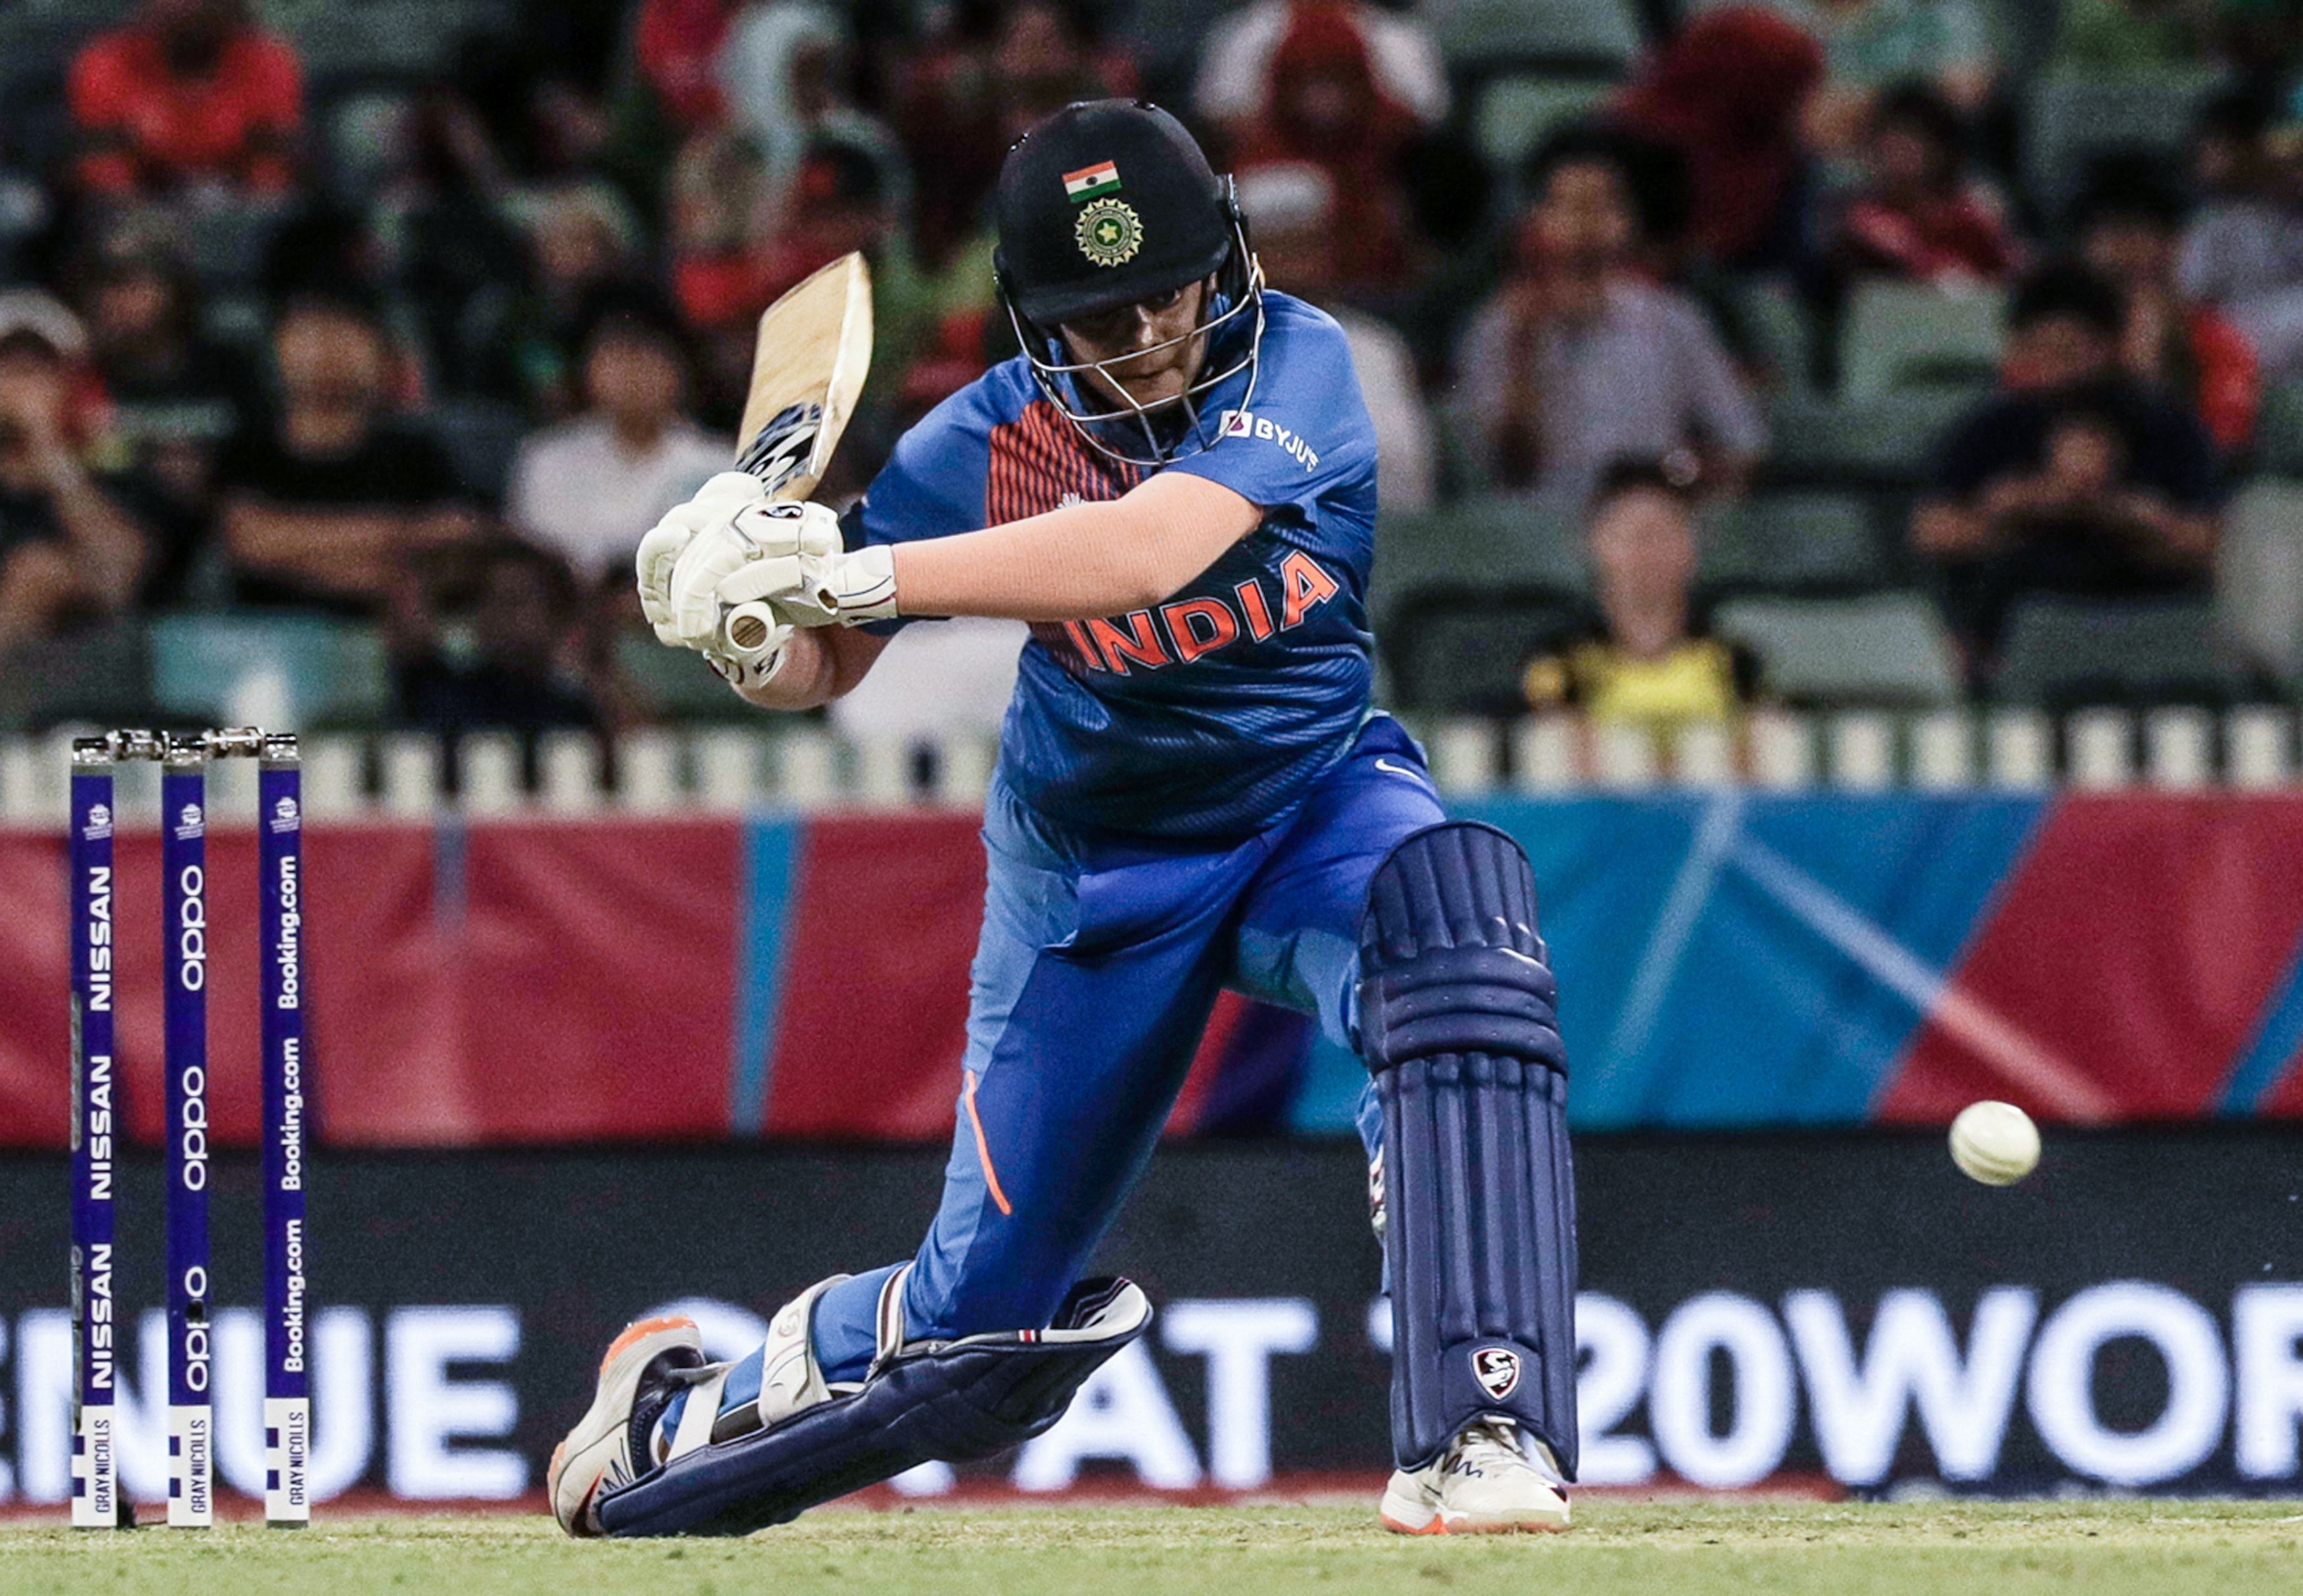 Shafali Verma of India plays a shot during the Twenty20 women's World Cup cricket match between India and Bangladesh in Perth. (AFP Photo)